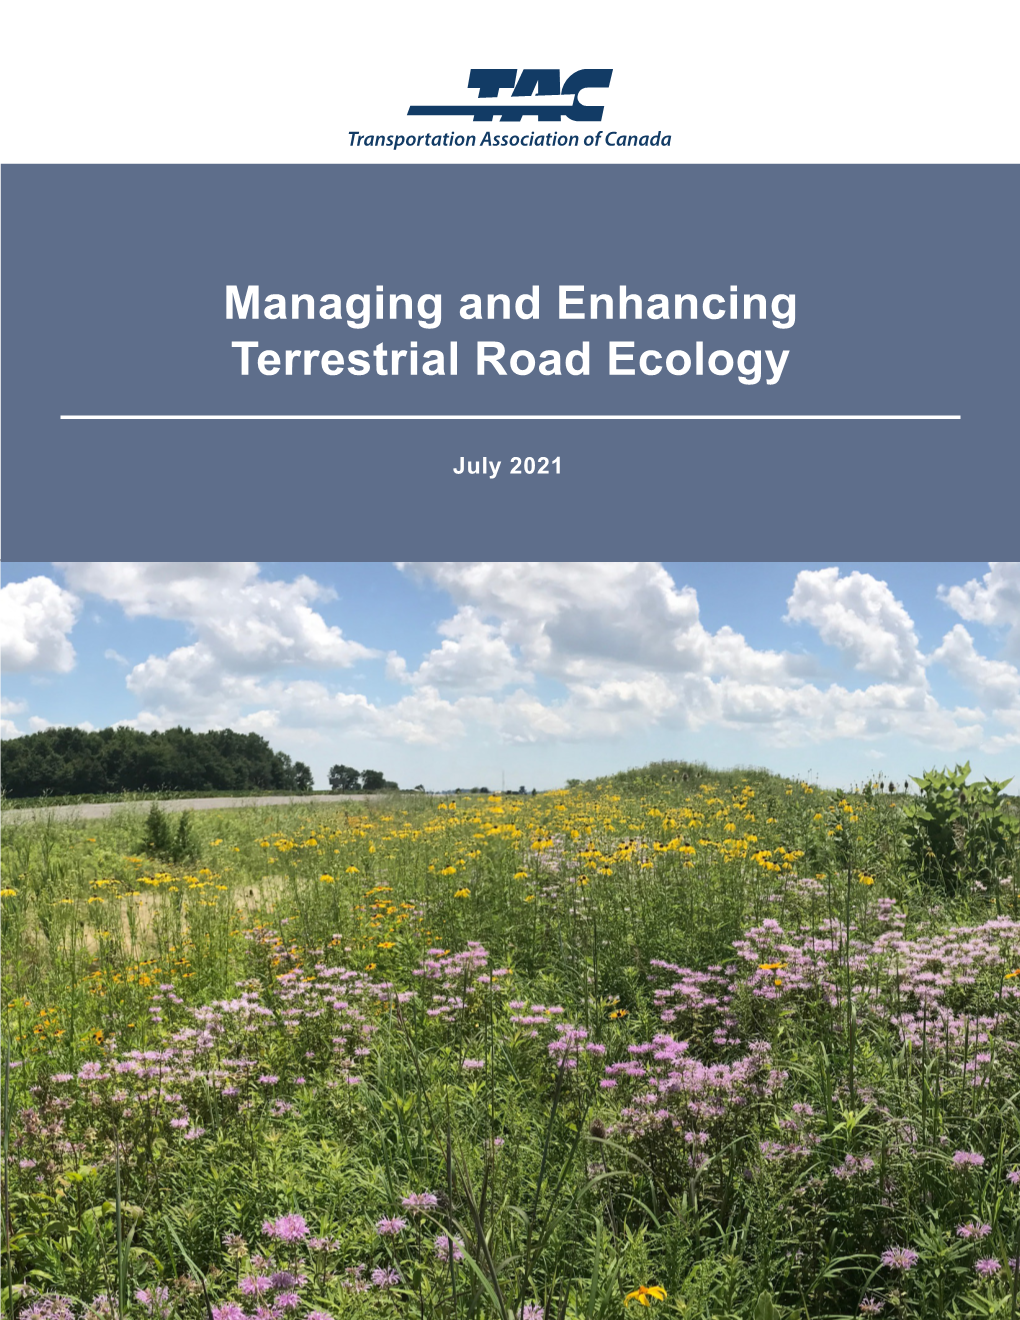 Managing and Enhancing Terrestrial Road Ecology